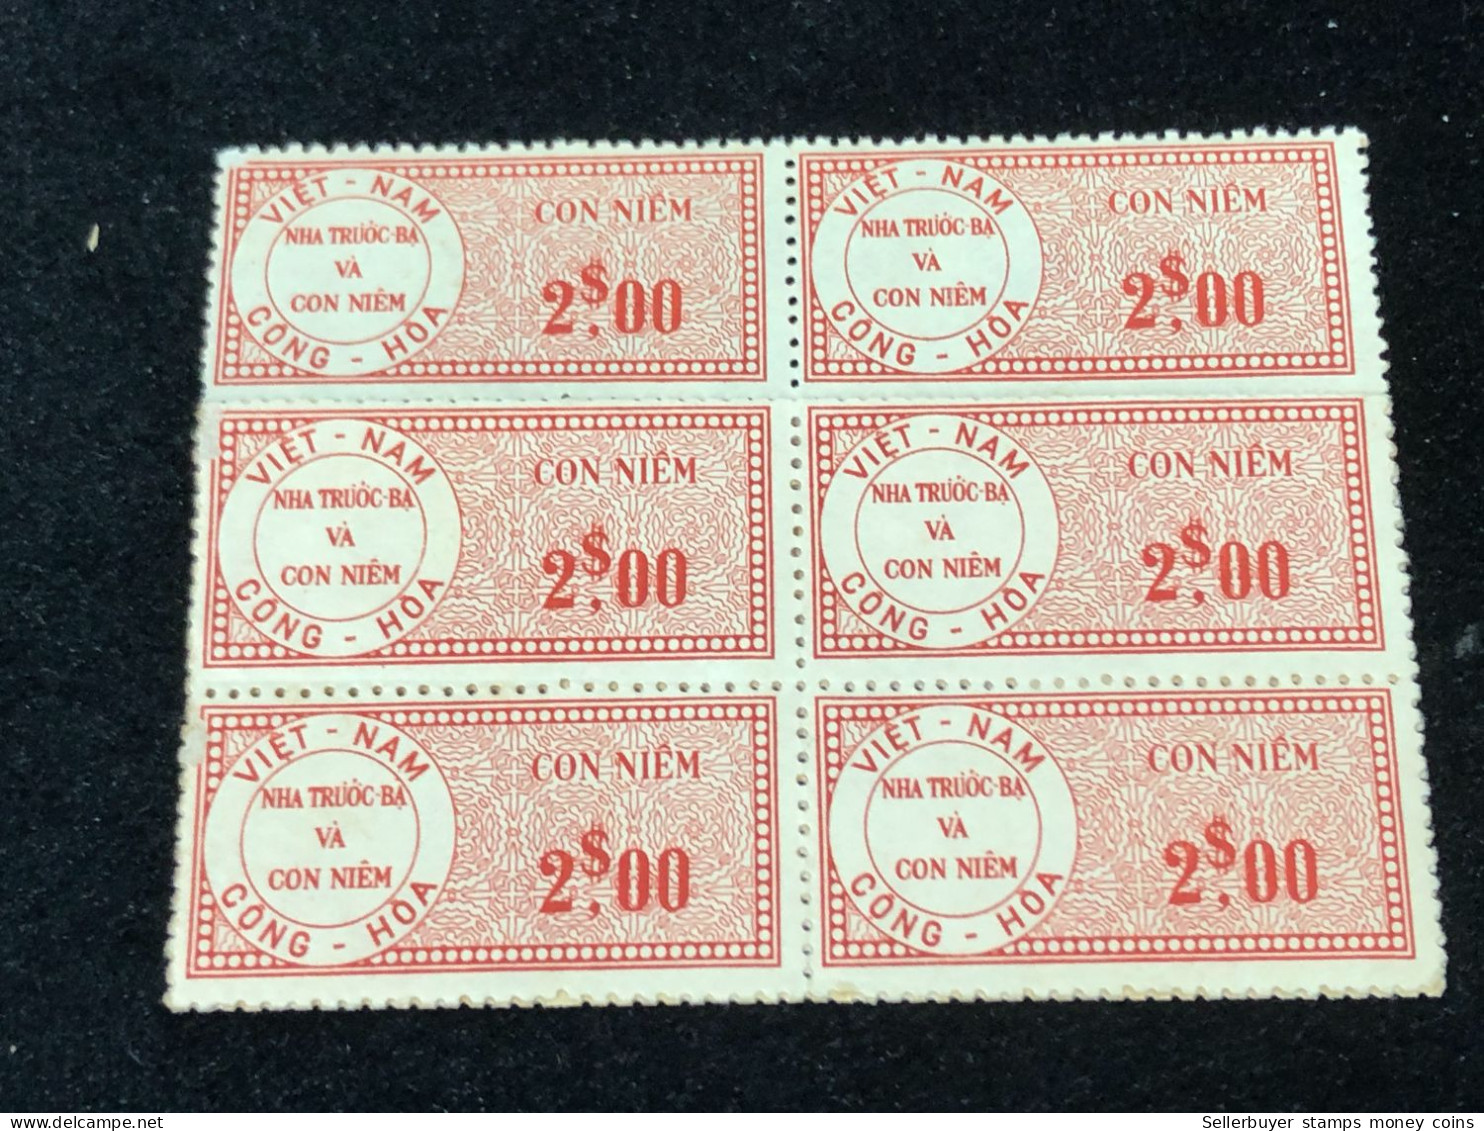 Vietnam South Wedge Before 1975( 2 $ The Wedge Has Not Been Used Yet) 1 Pcs 6 Stamps Quality Good - Sammlungen